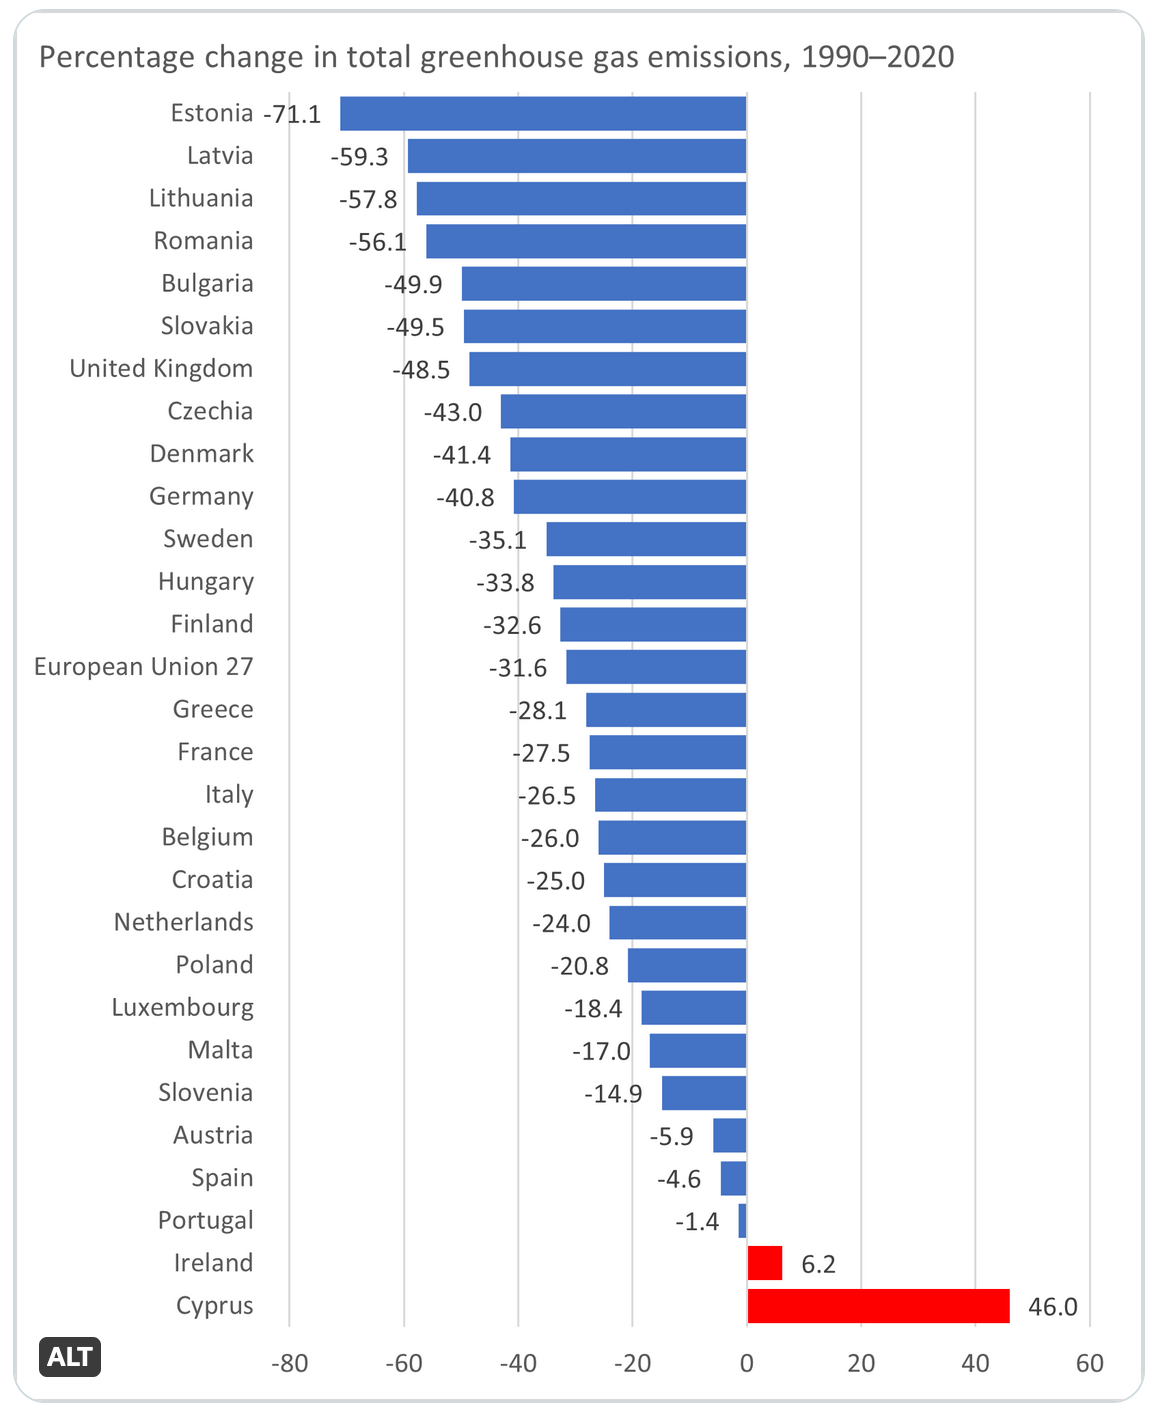 Chart showing the change in total greenhouse gas emissions from 27 EU countries and the UK between 1990 and 2020.  Data source: https://ec.europa.eu/eurostat/databrowser/view/SDG_13_10/bookmark/table?lang=en&bookmarkId=844c1fa2-d7c4-4454-9720-c87128f218f7  Data: Estonia	-71.1 Latvia	-59.3 Lithuania	-57.8 Romania	-56.1 Bulgaria	-49.9 Slovakia	-49.5 United Kingdom	-48.5 Czechia	-43.0 Denmark	-41.4 Germany	-40.8 Sweden	-35.1 Hungary	-33.8 Finland	-32.6 European Union 27	-31.6 Greece	-28.1 France	-27.5 Italy	-26.5 Belgium	-26.0 Croatia	-25.0 Netherlands	-24.0 Poland	-20.8 Luxembourg	-18.4 Malta	-17.0 Slovenia	-14.9 Austria	-5.9 Spain	-4.6 Portugal	-1.4 Ireland	6.2 Cyprus	46.0